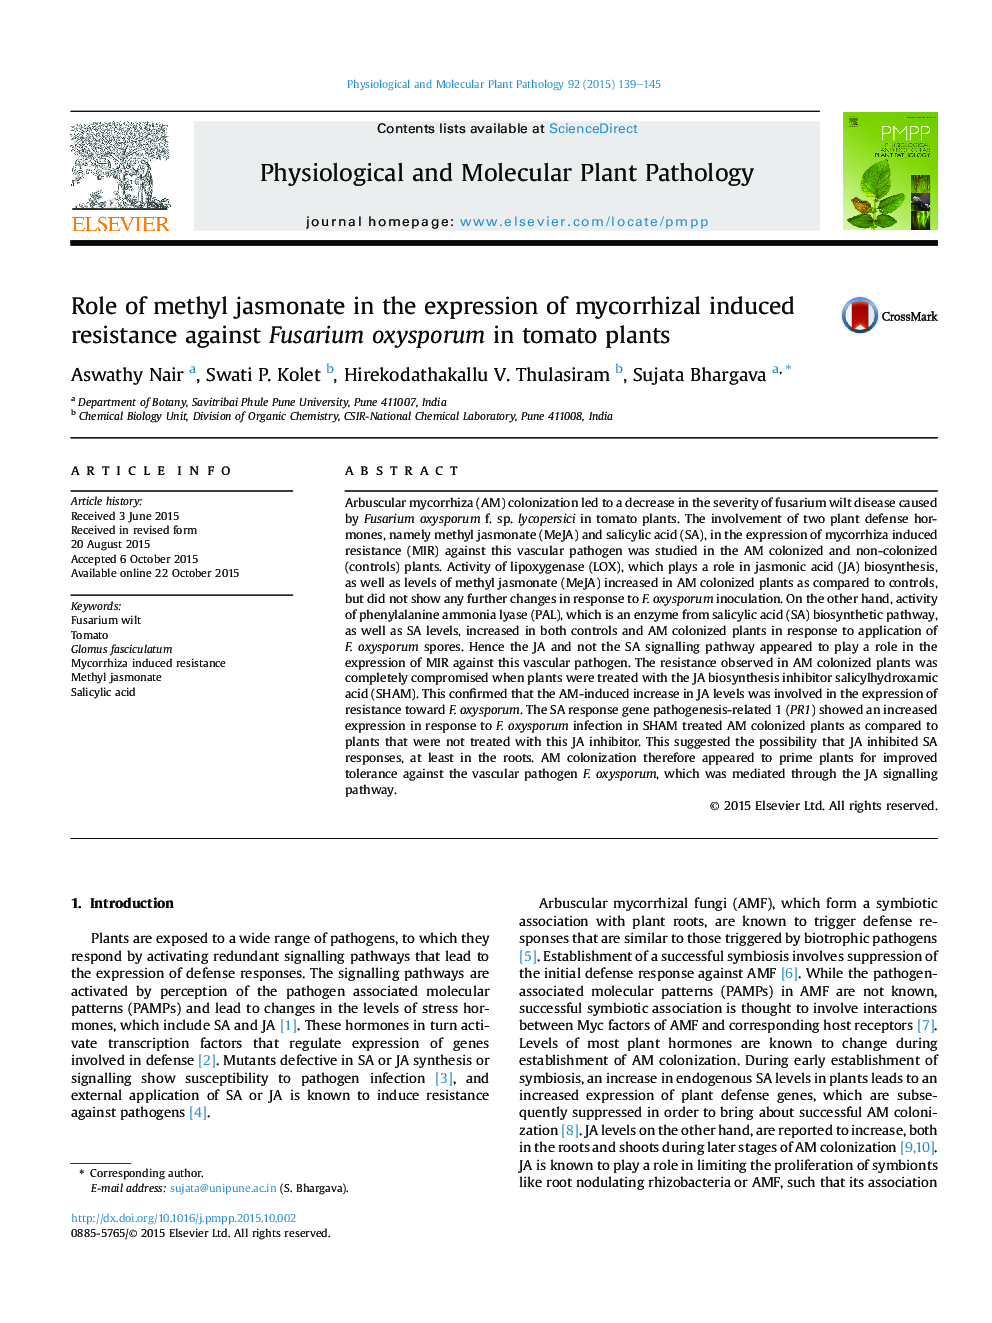 Role of methyl jasmonate in the expression of mycorrhizal induced resistance against Fusarium oxysporum in tomato plants